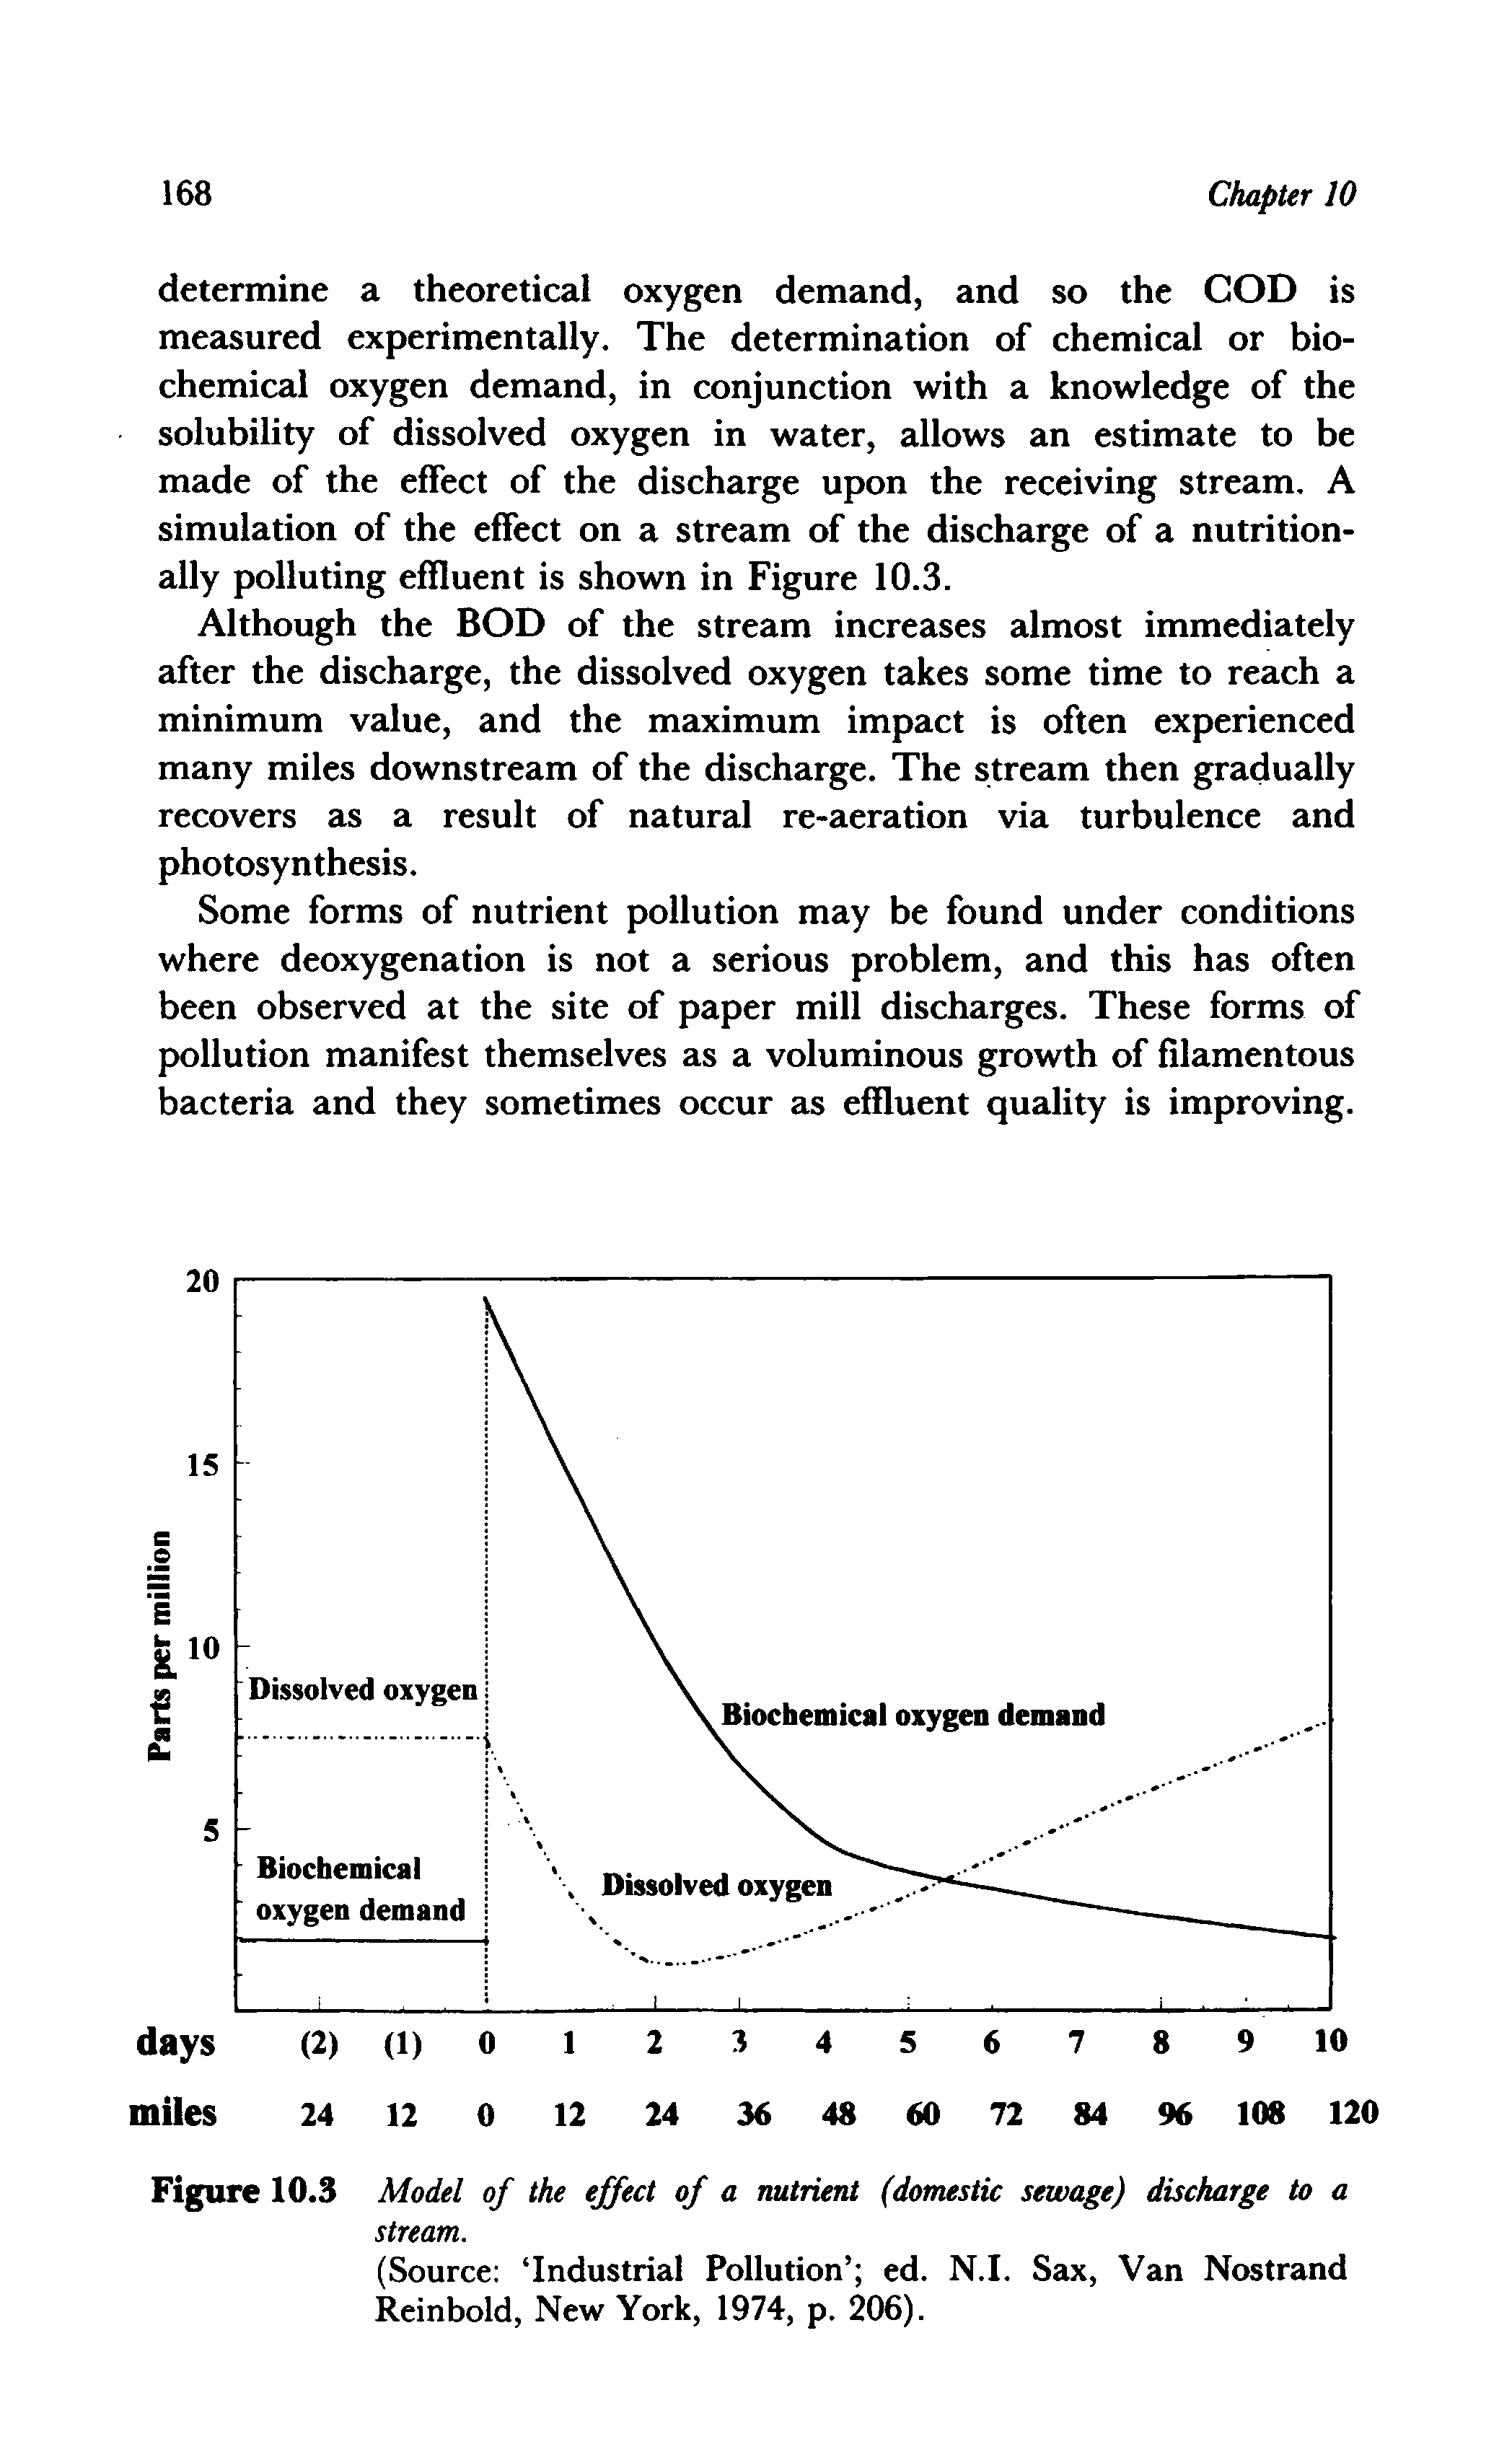 Figure 10.3 Model of the effect of a nutrient (domestic sewage) discharge to a stream.